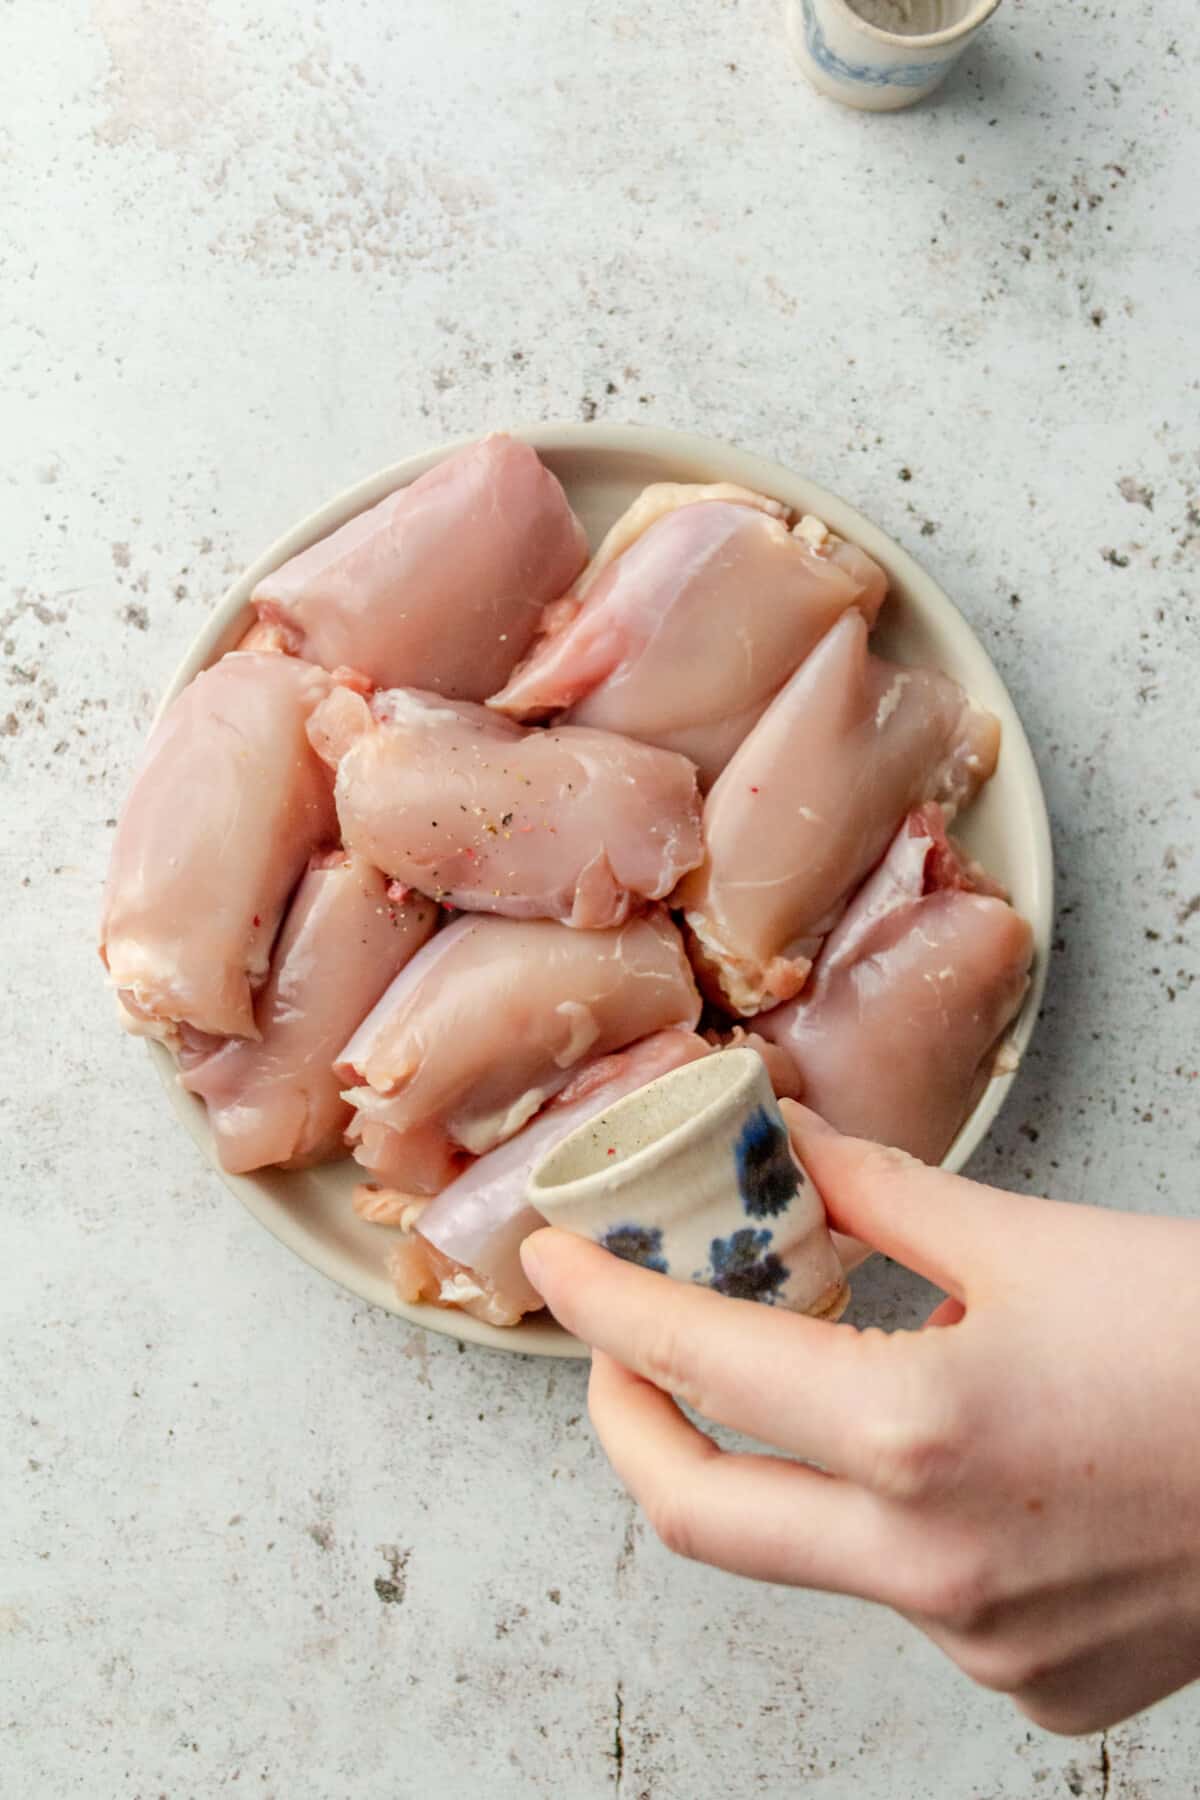 A person sprinkling salt and pepper onto a plate of raw chicken thighs.